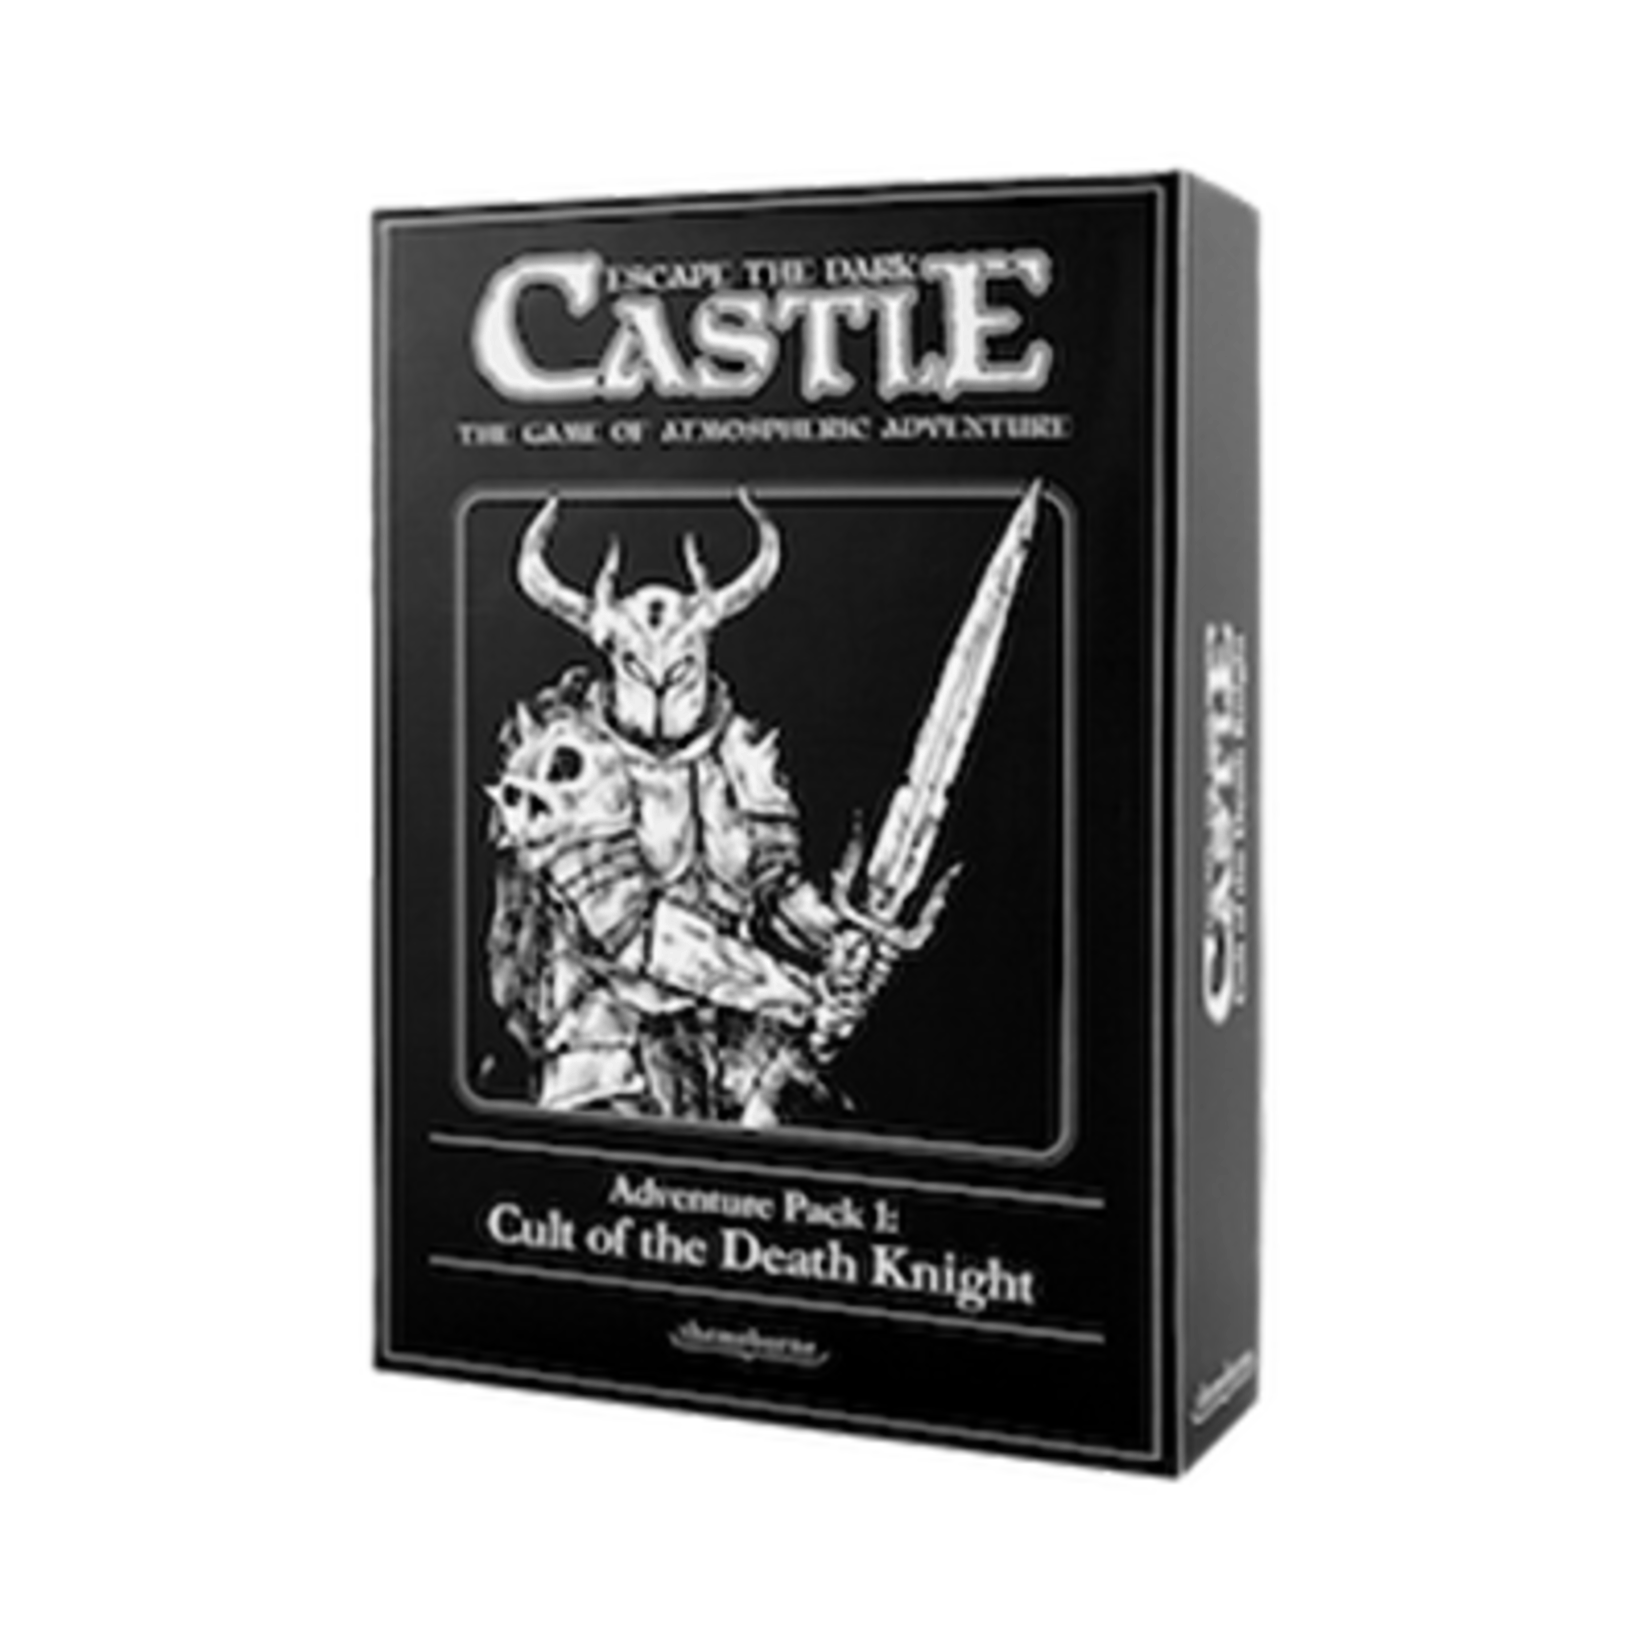 Themeborne Escape the Dark Castle Cult of the Death Knight Expansion